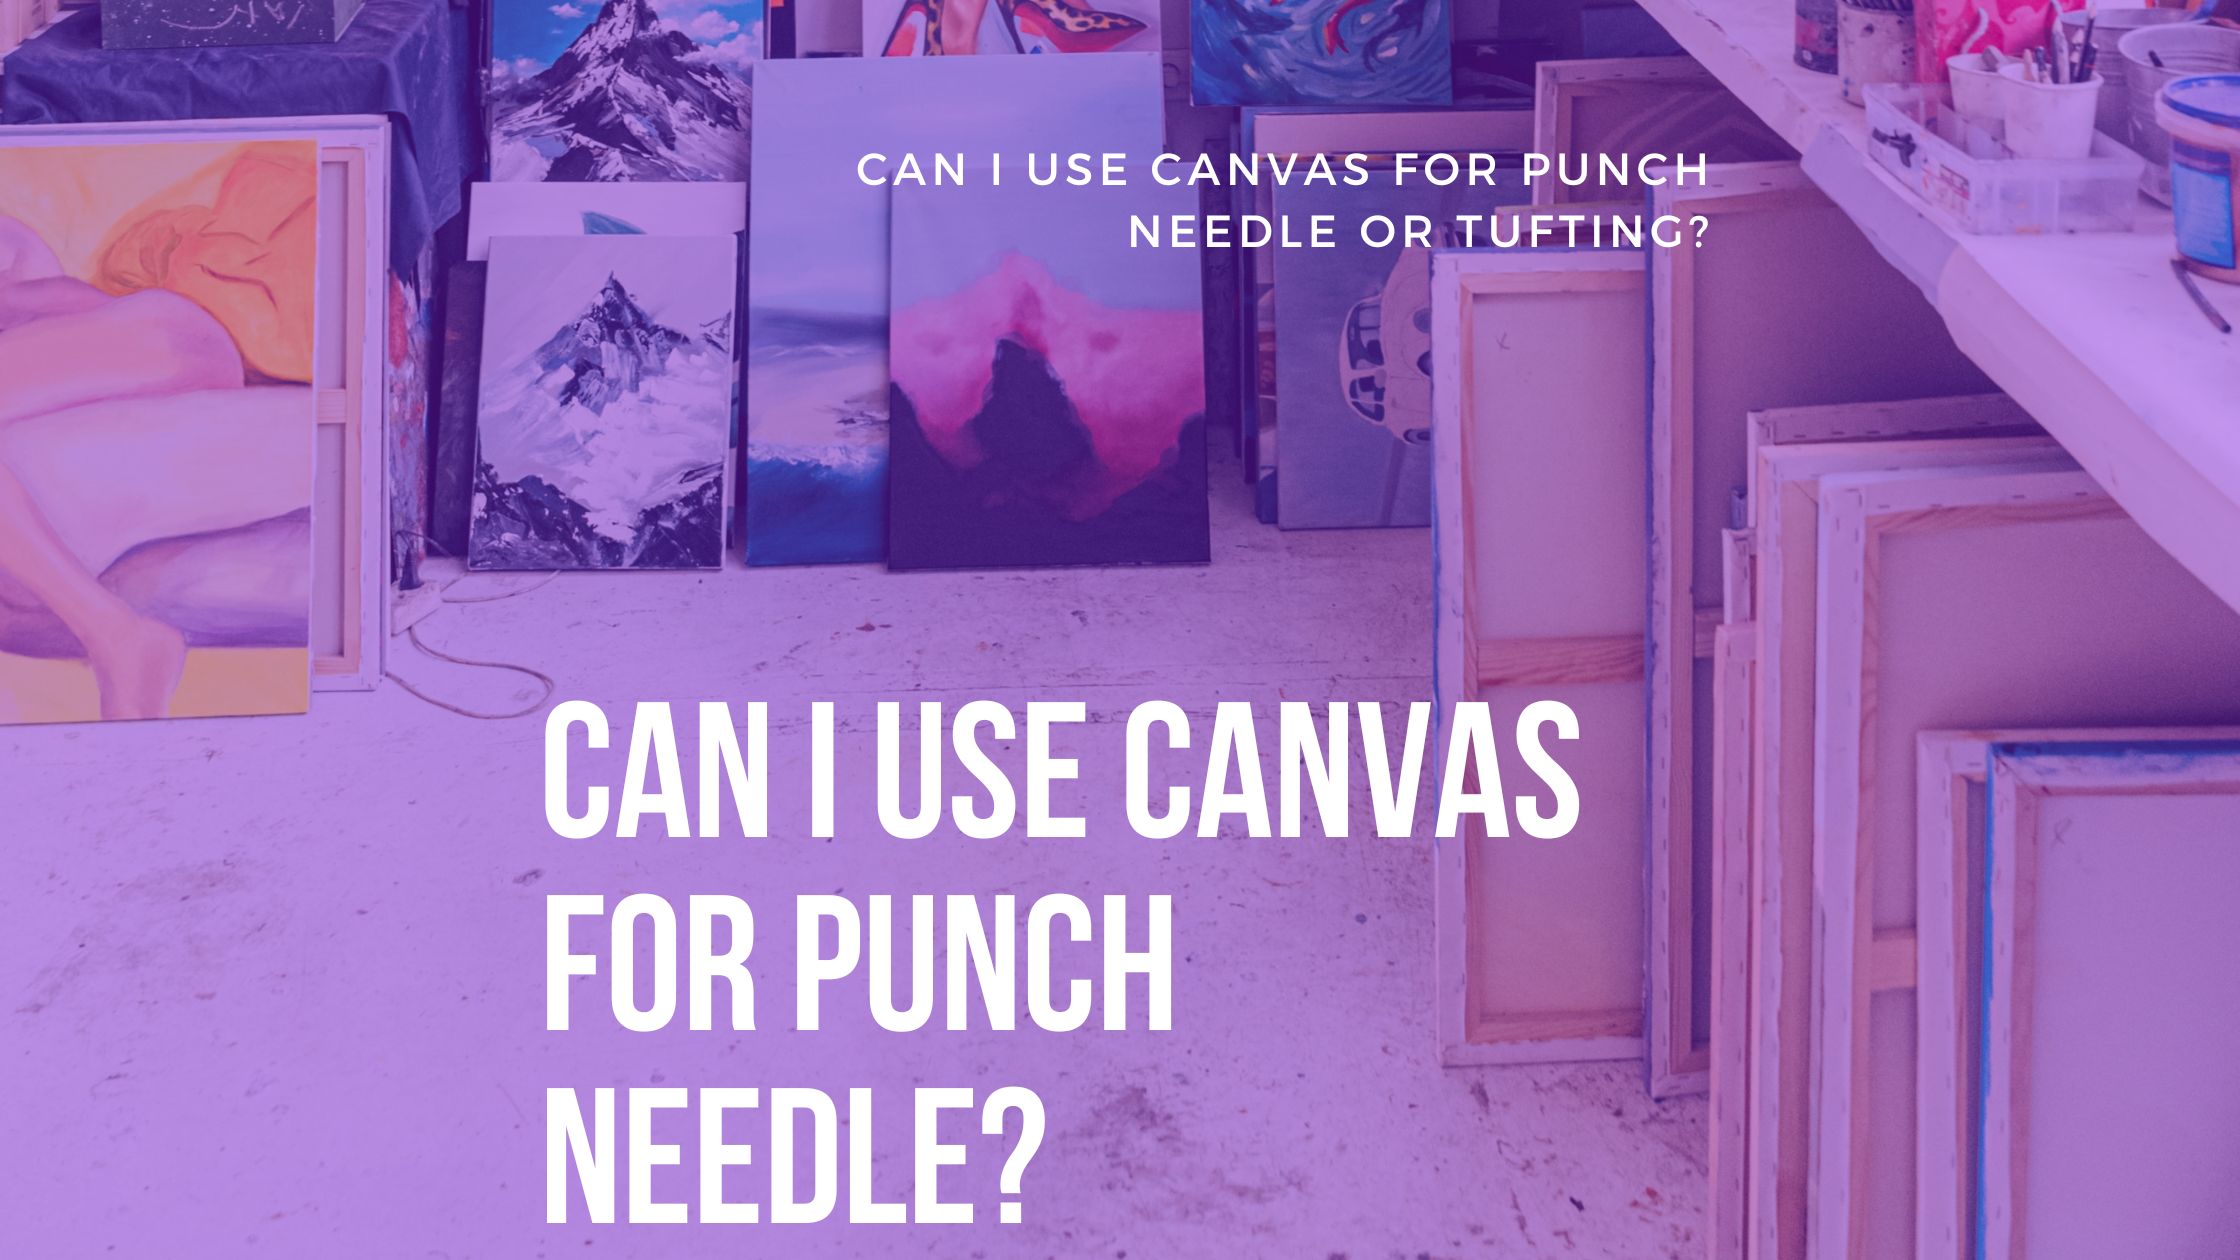 Can I Use Canvas For Punch Needle?